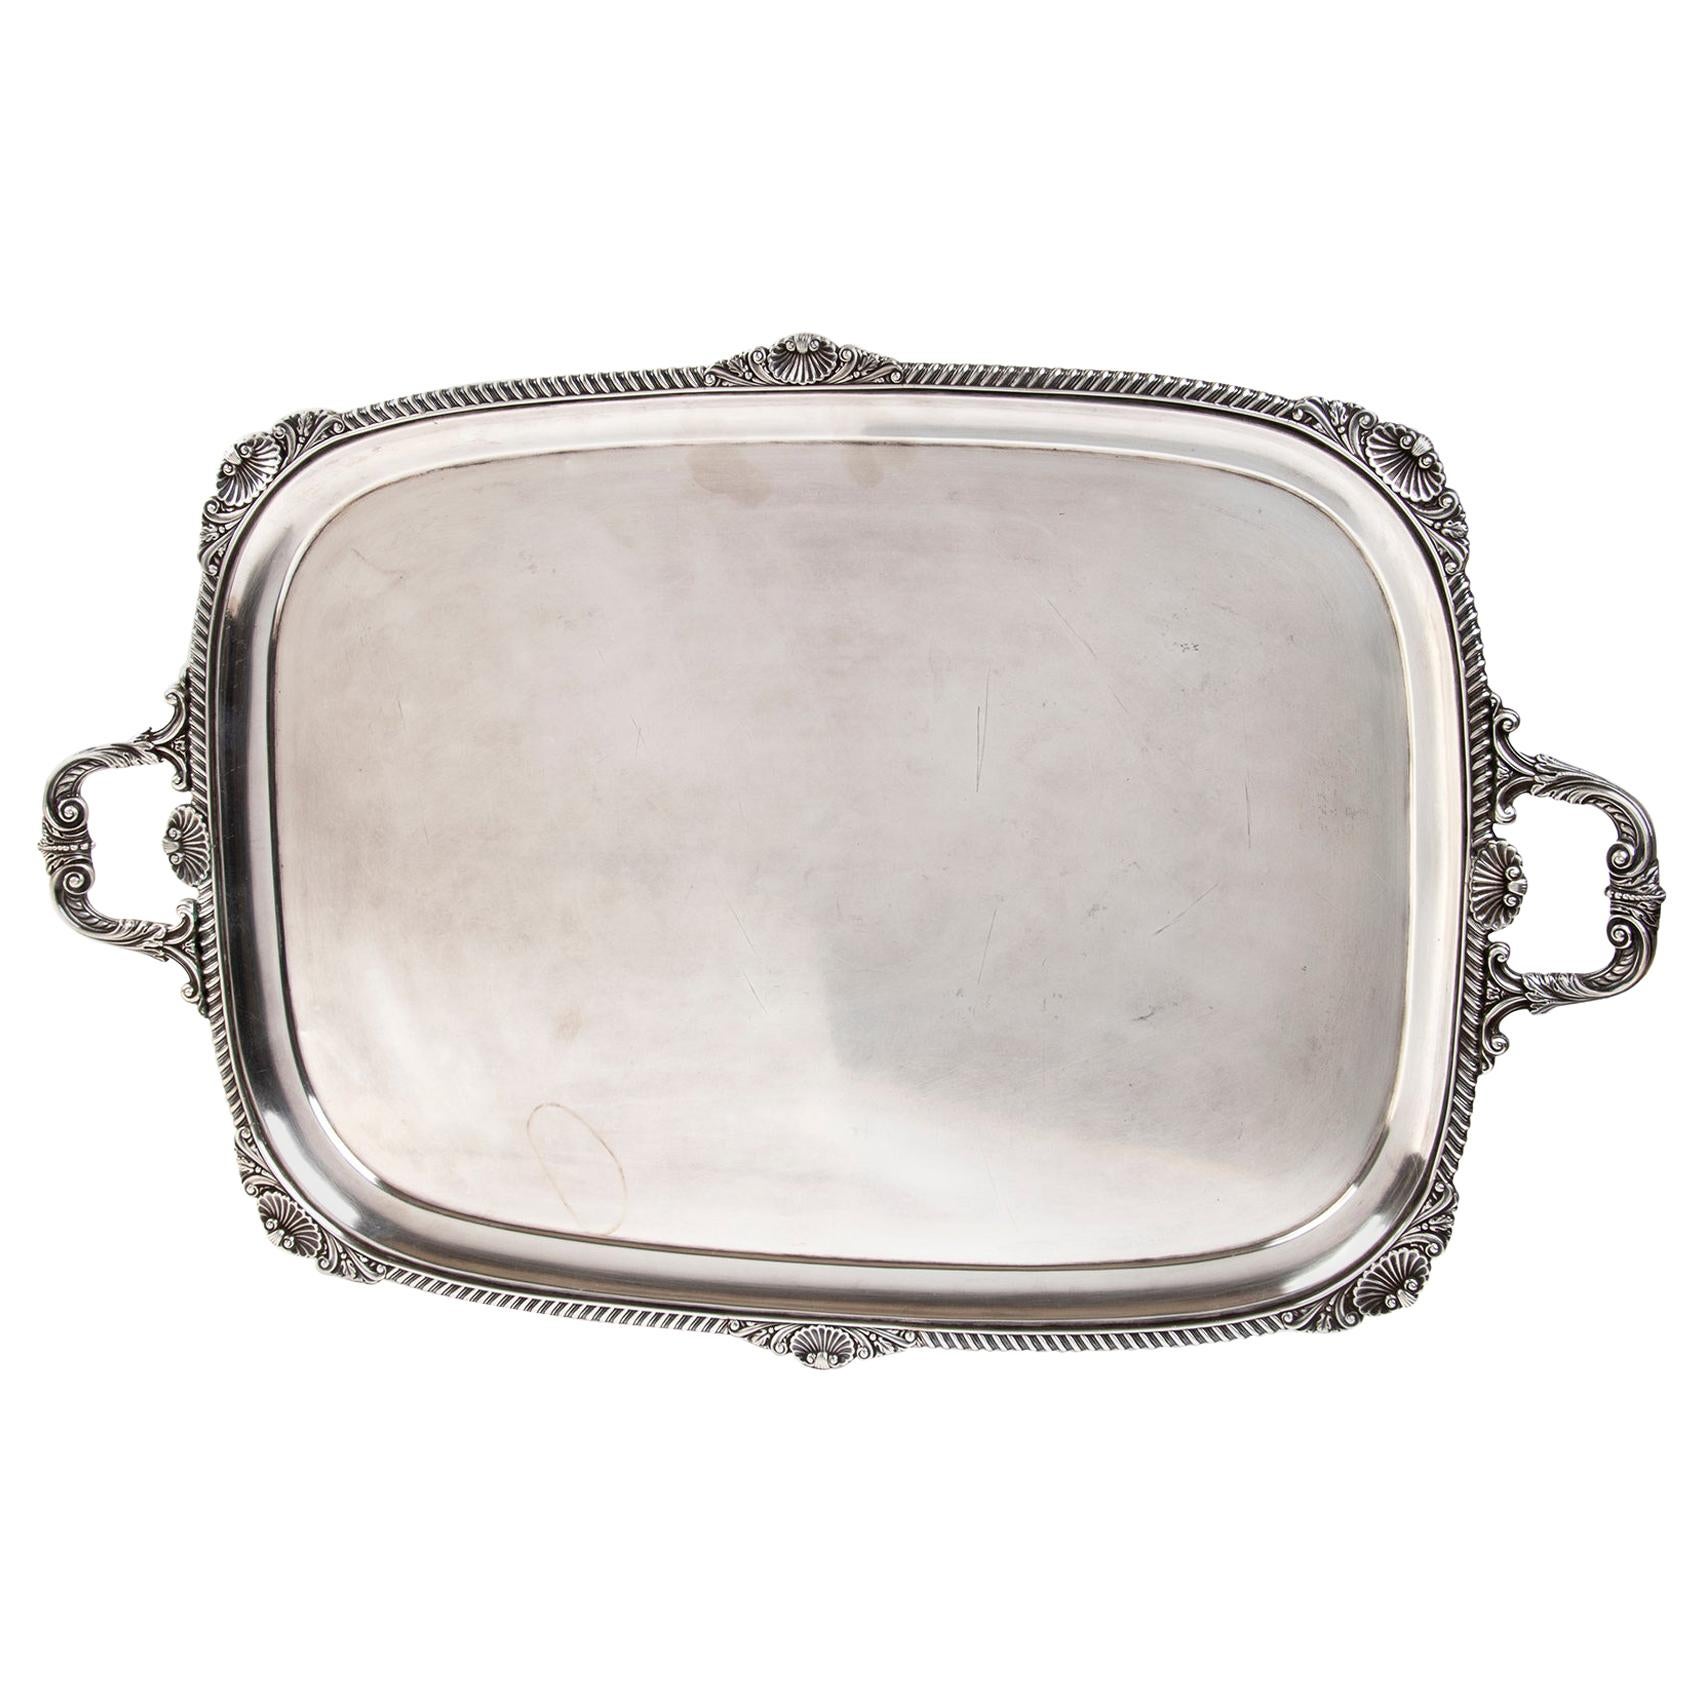 Important Vintage Silver Tray by Hawksworth Eyre & Co. Ltd, London, 1905